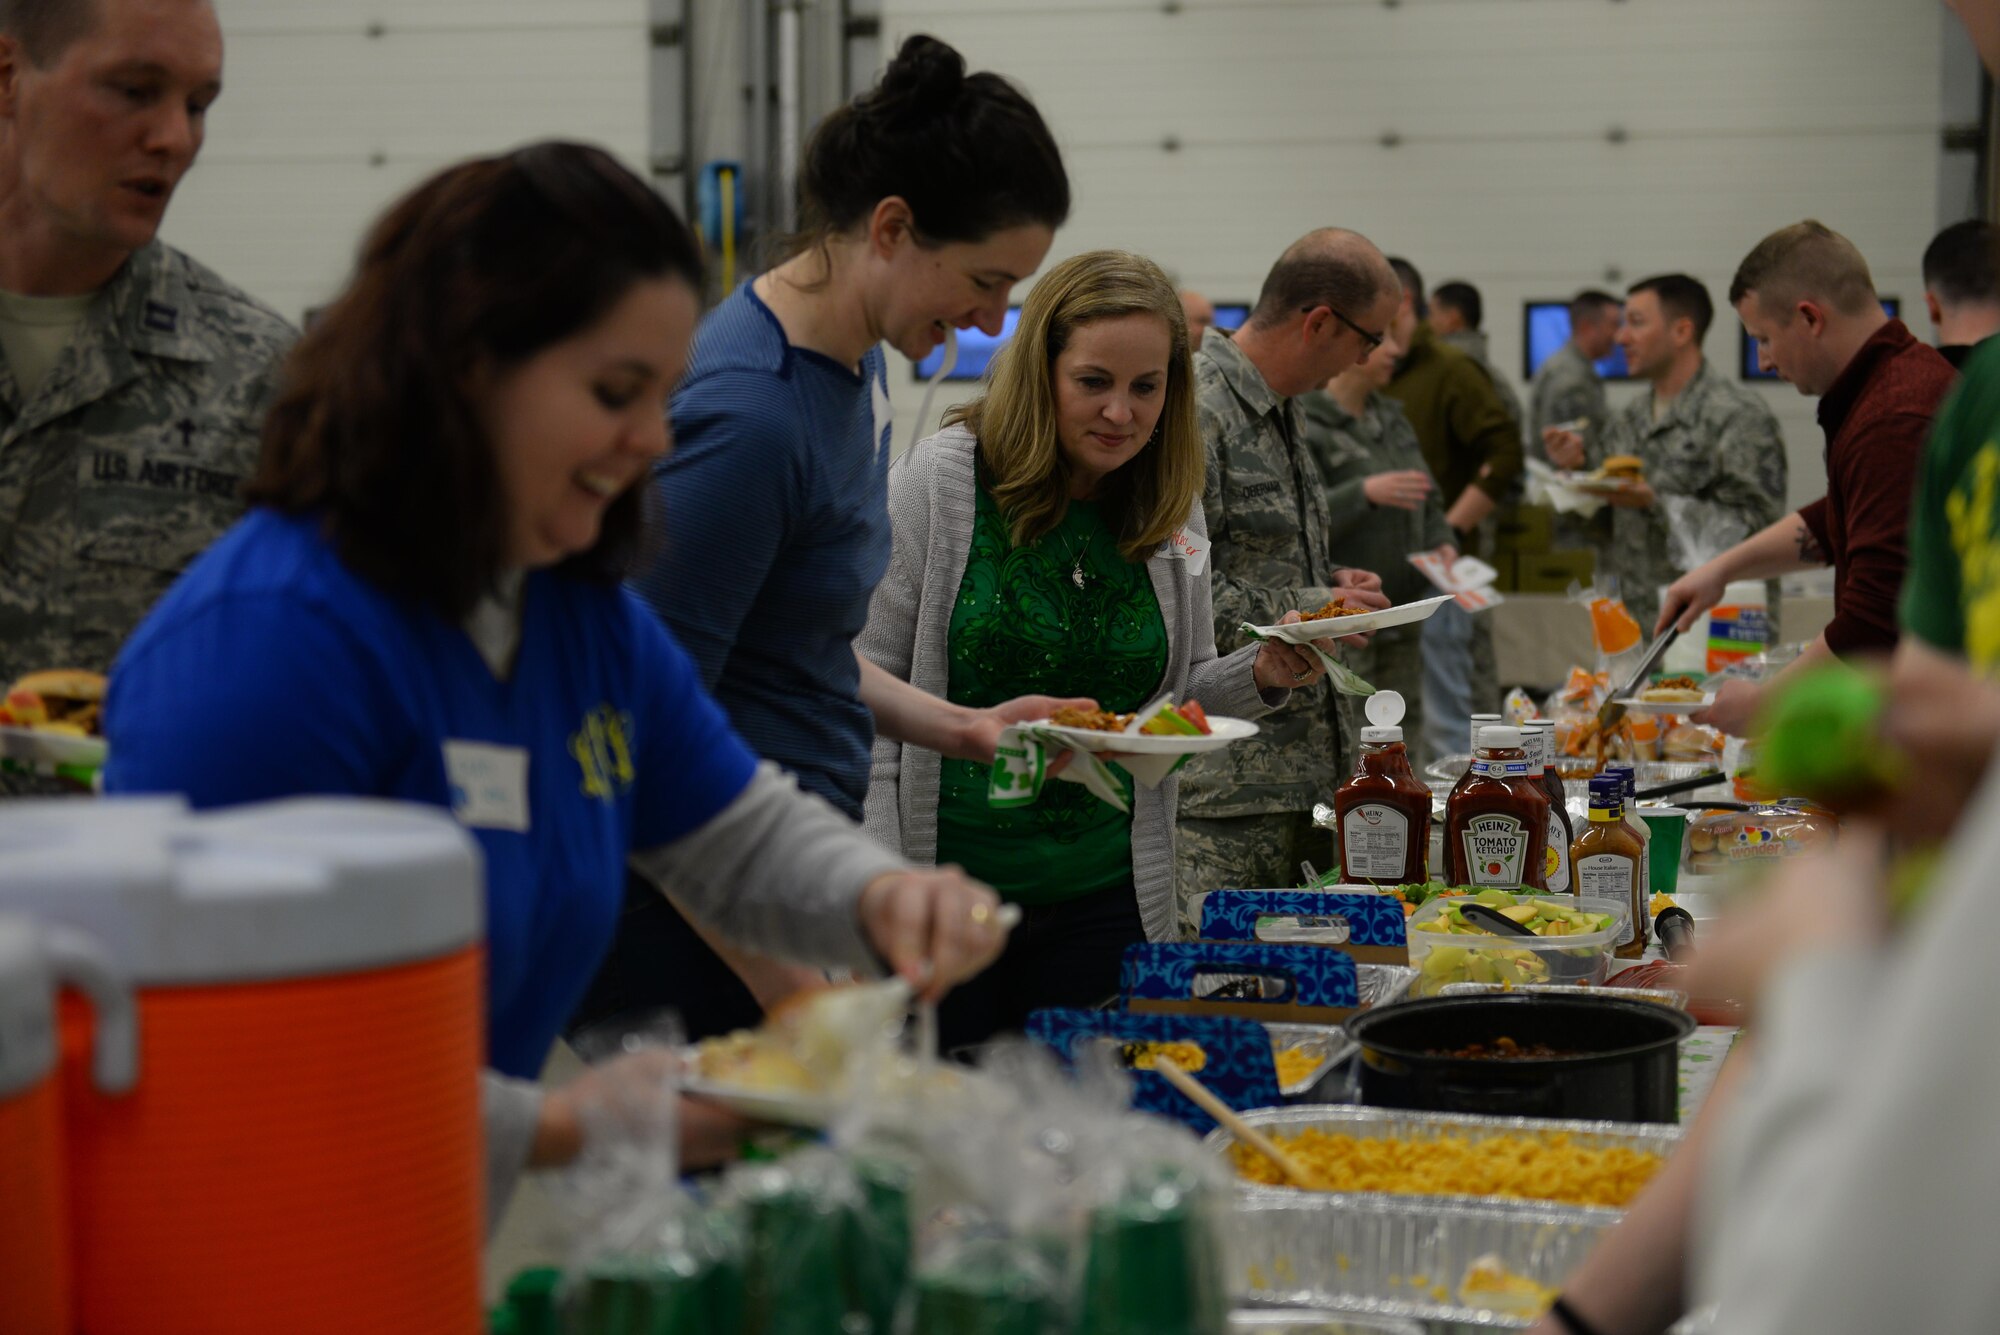 Members of Team Mildenhall prepare their plates during Hearts Apart March 16, 2017, at the fire department on RAF Mildenhall, England. This month’s theme was based on St. Patrick’s Day. Participants enjoyed free food, a bouncy castle, photos with a “Leprechaun” and a magic show. (U.S. Air Force photo by Staff Sgt. Micaiah Anthony)